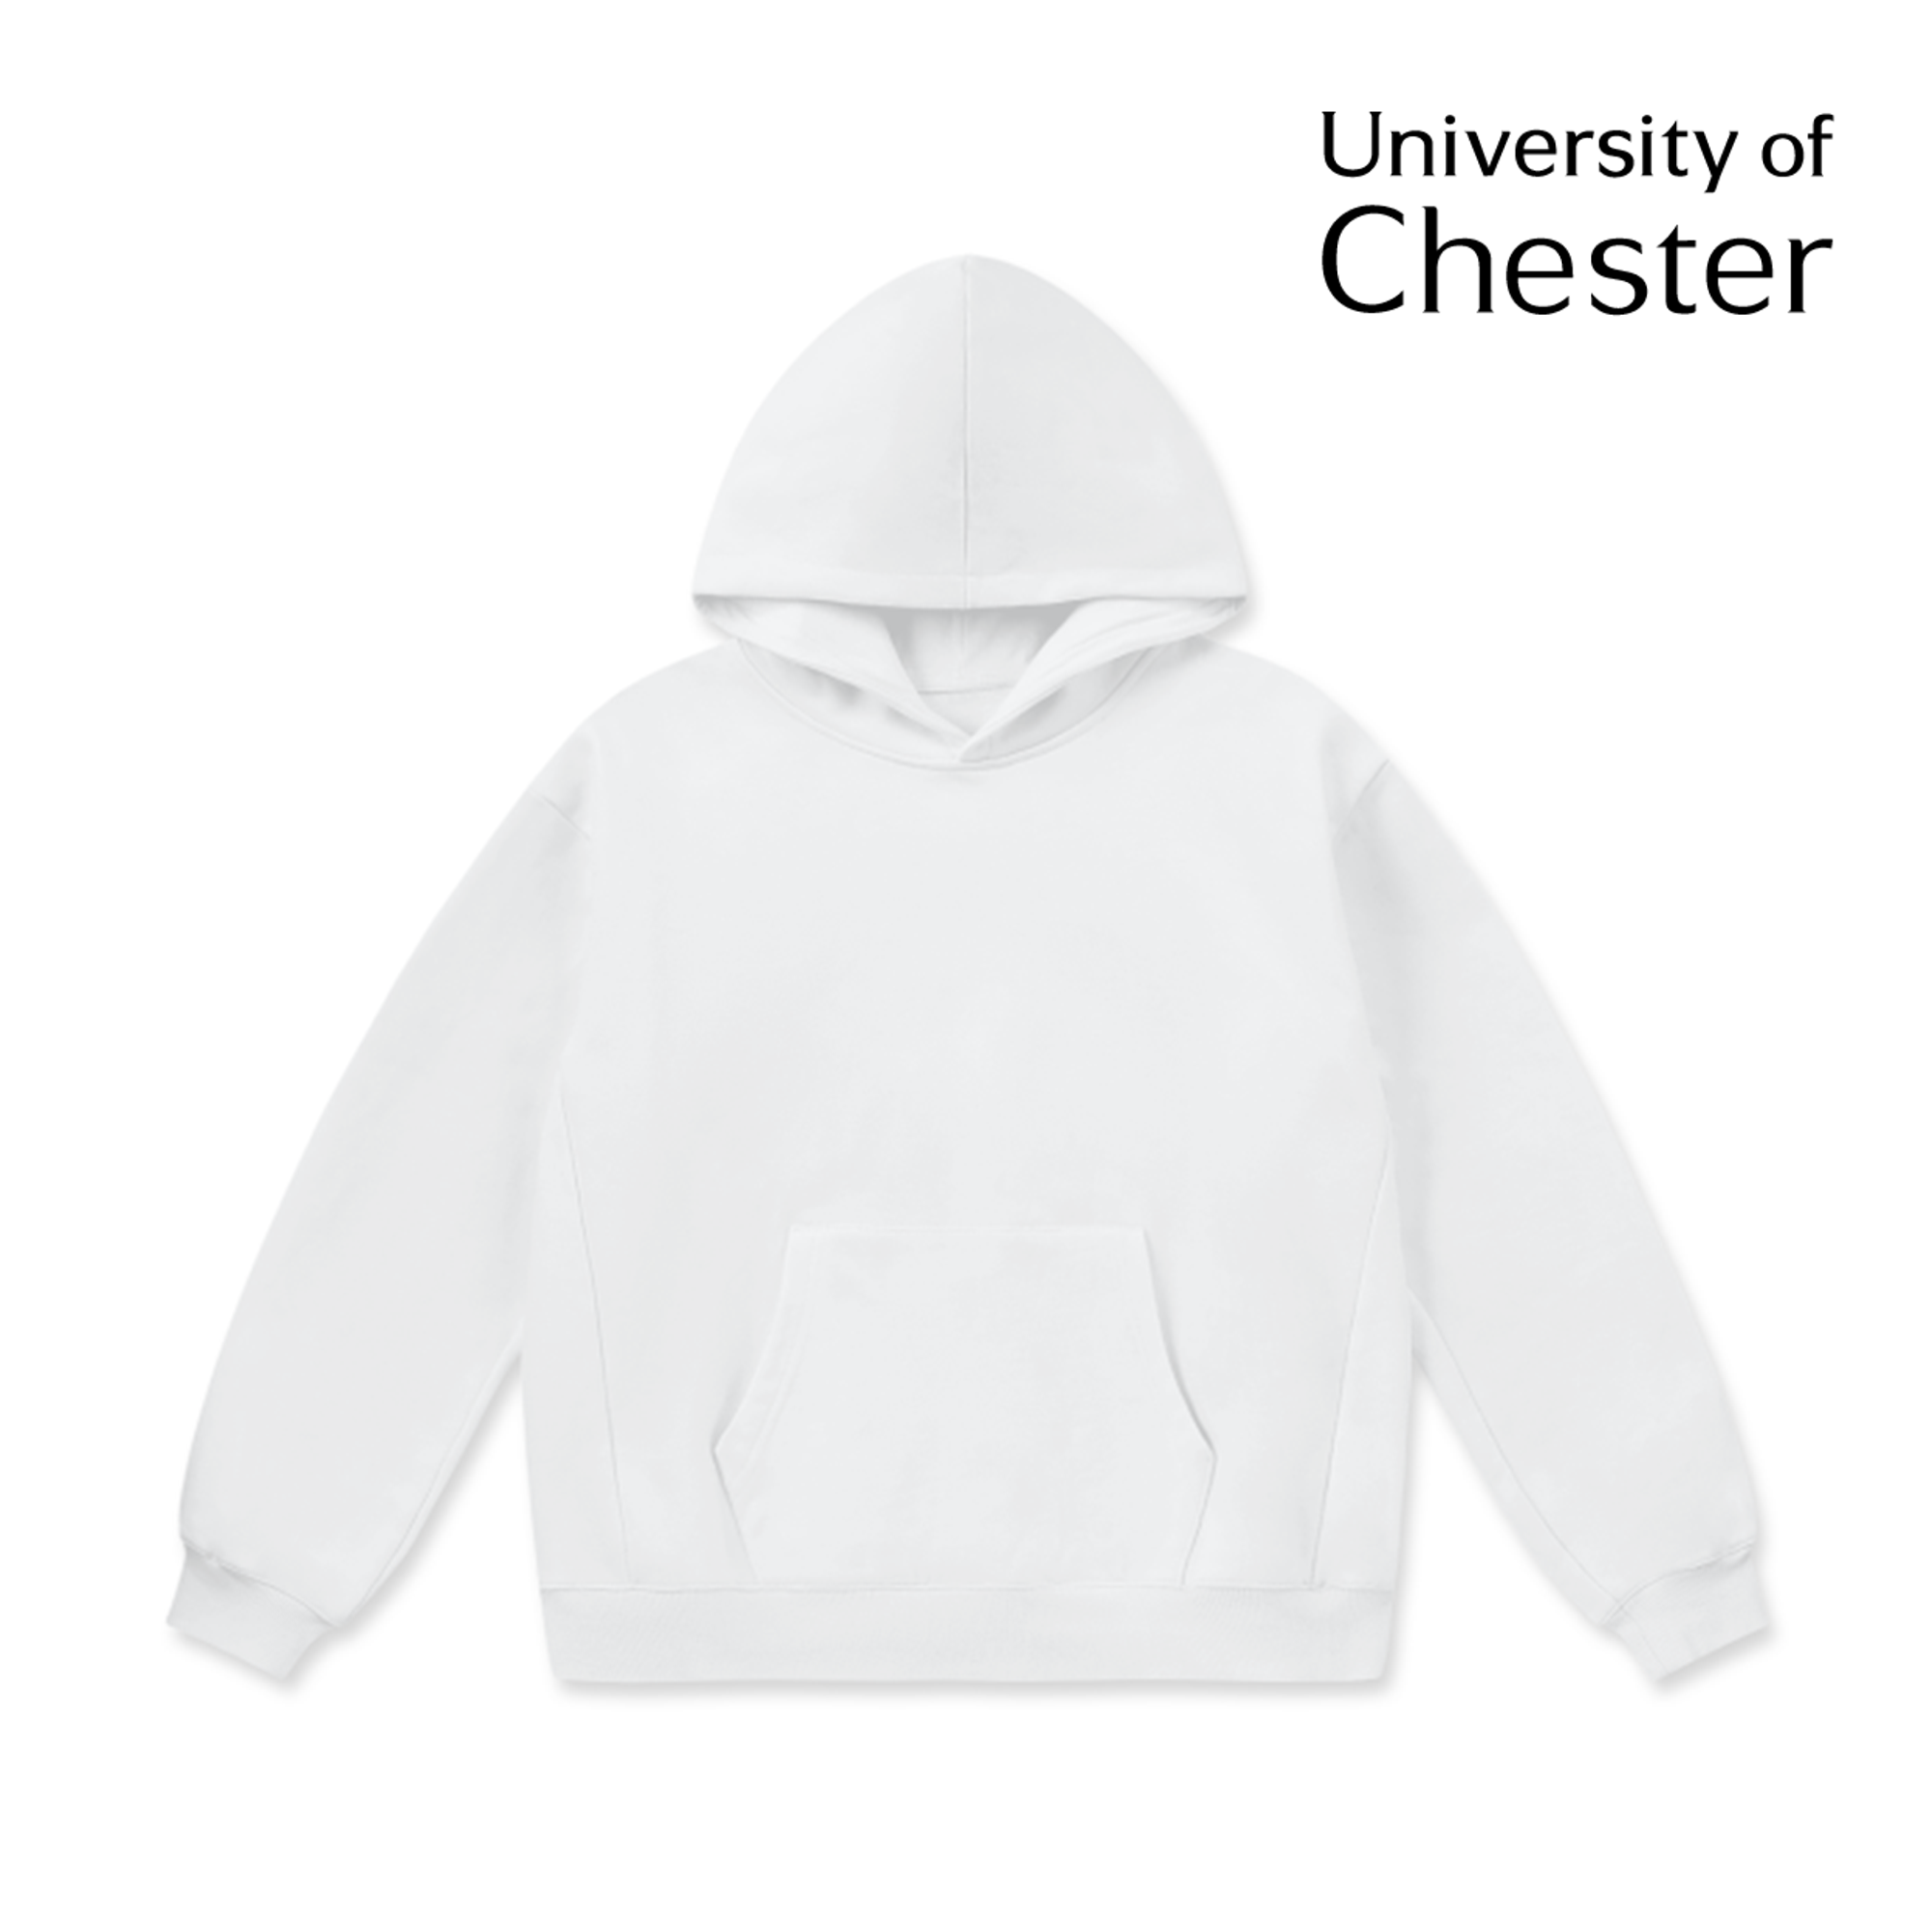 LCC Super Weighted Hoodie - University of Chester (Modern)